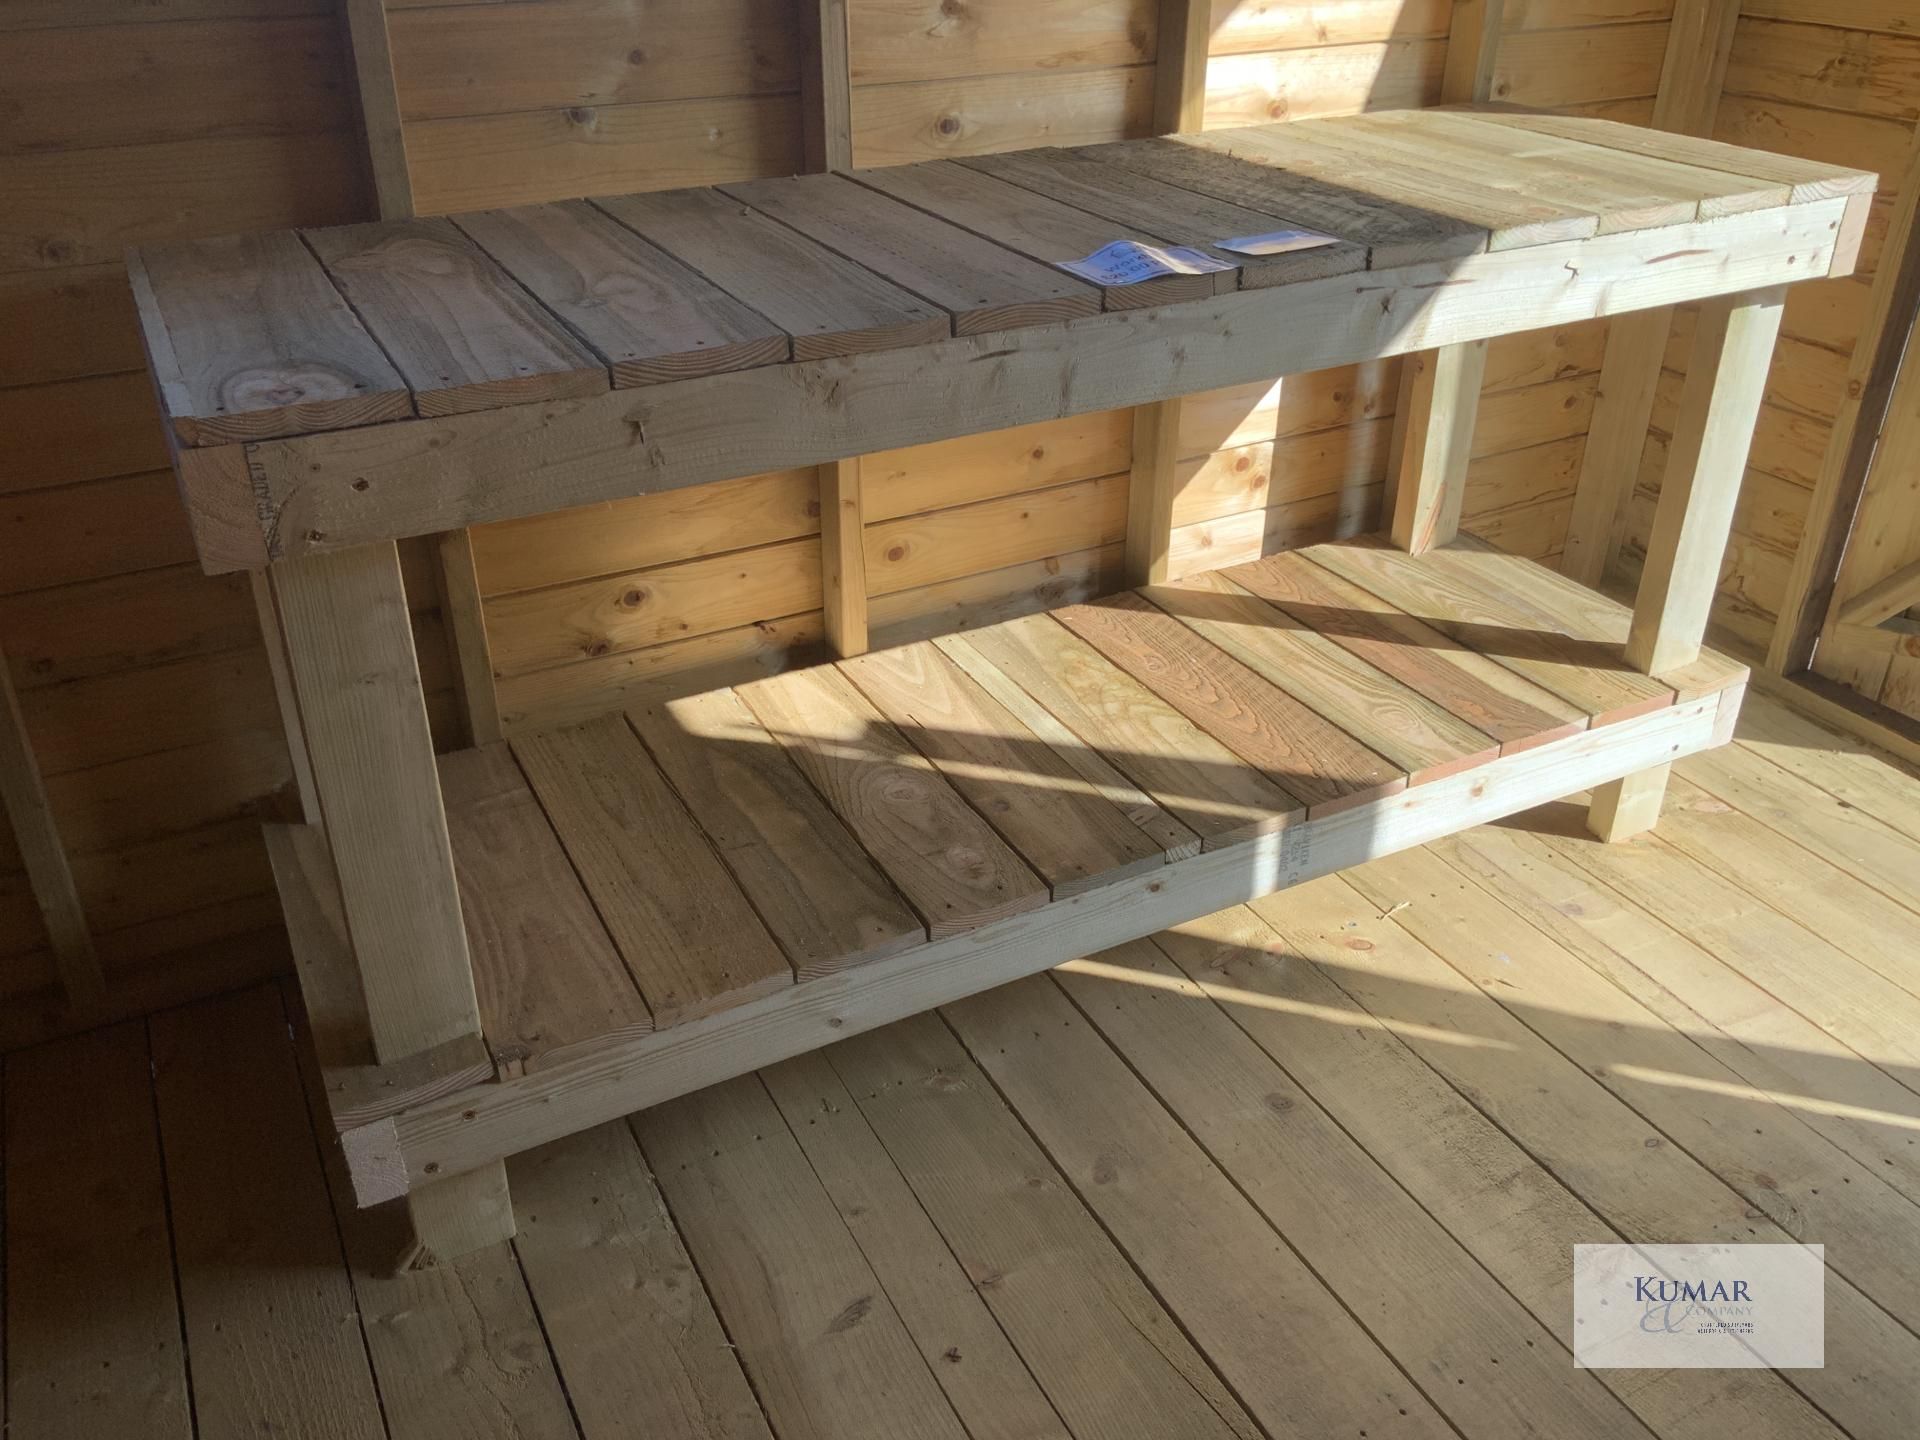 Wooden Work Bench Sizes, 182cm x 60cm x 90cm - Lot Location in Lot 94 - Image 5 of 6